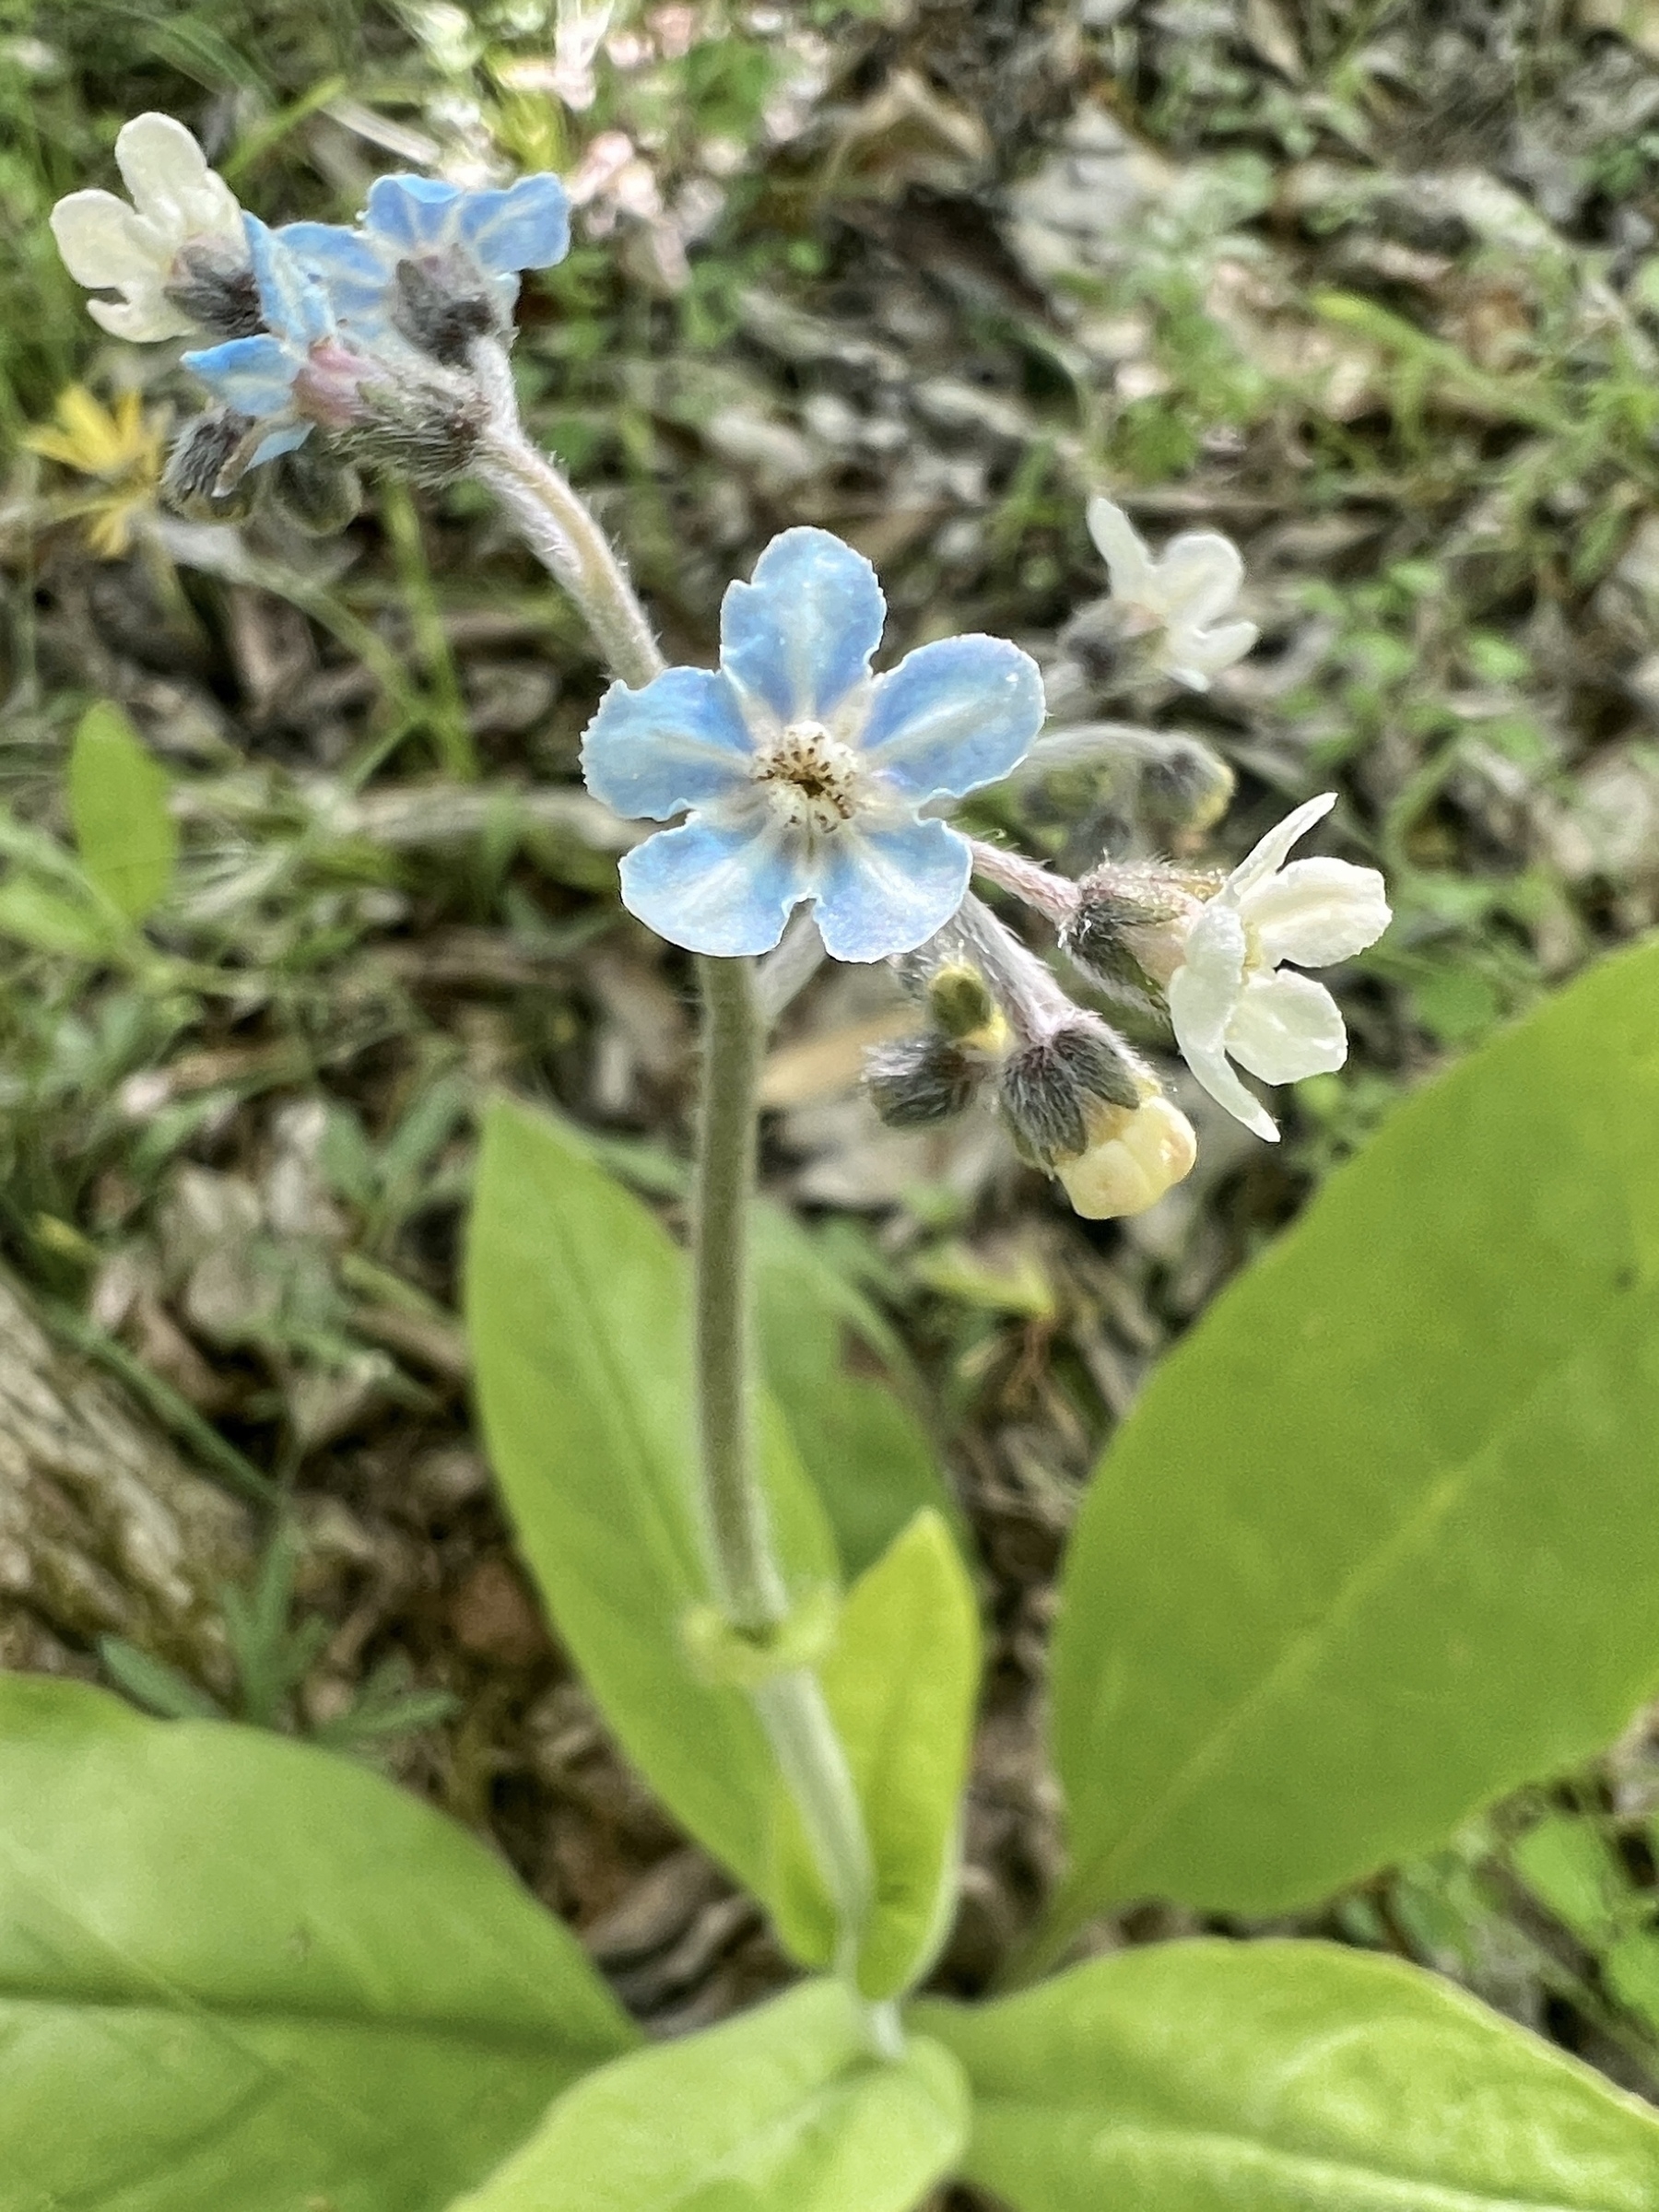 A large leaved plant with simple looking flowers that are grouped at the top of a hairy stem. The flowers are blue and have five rounded petals